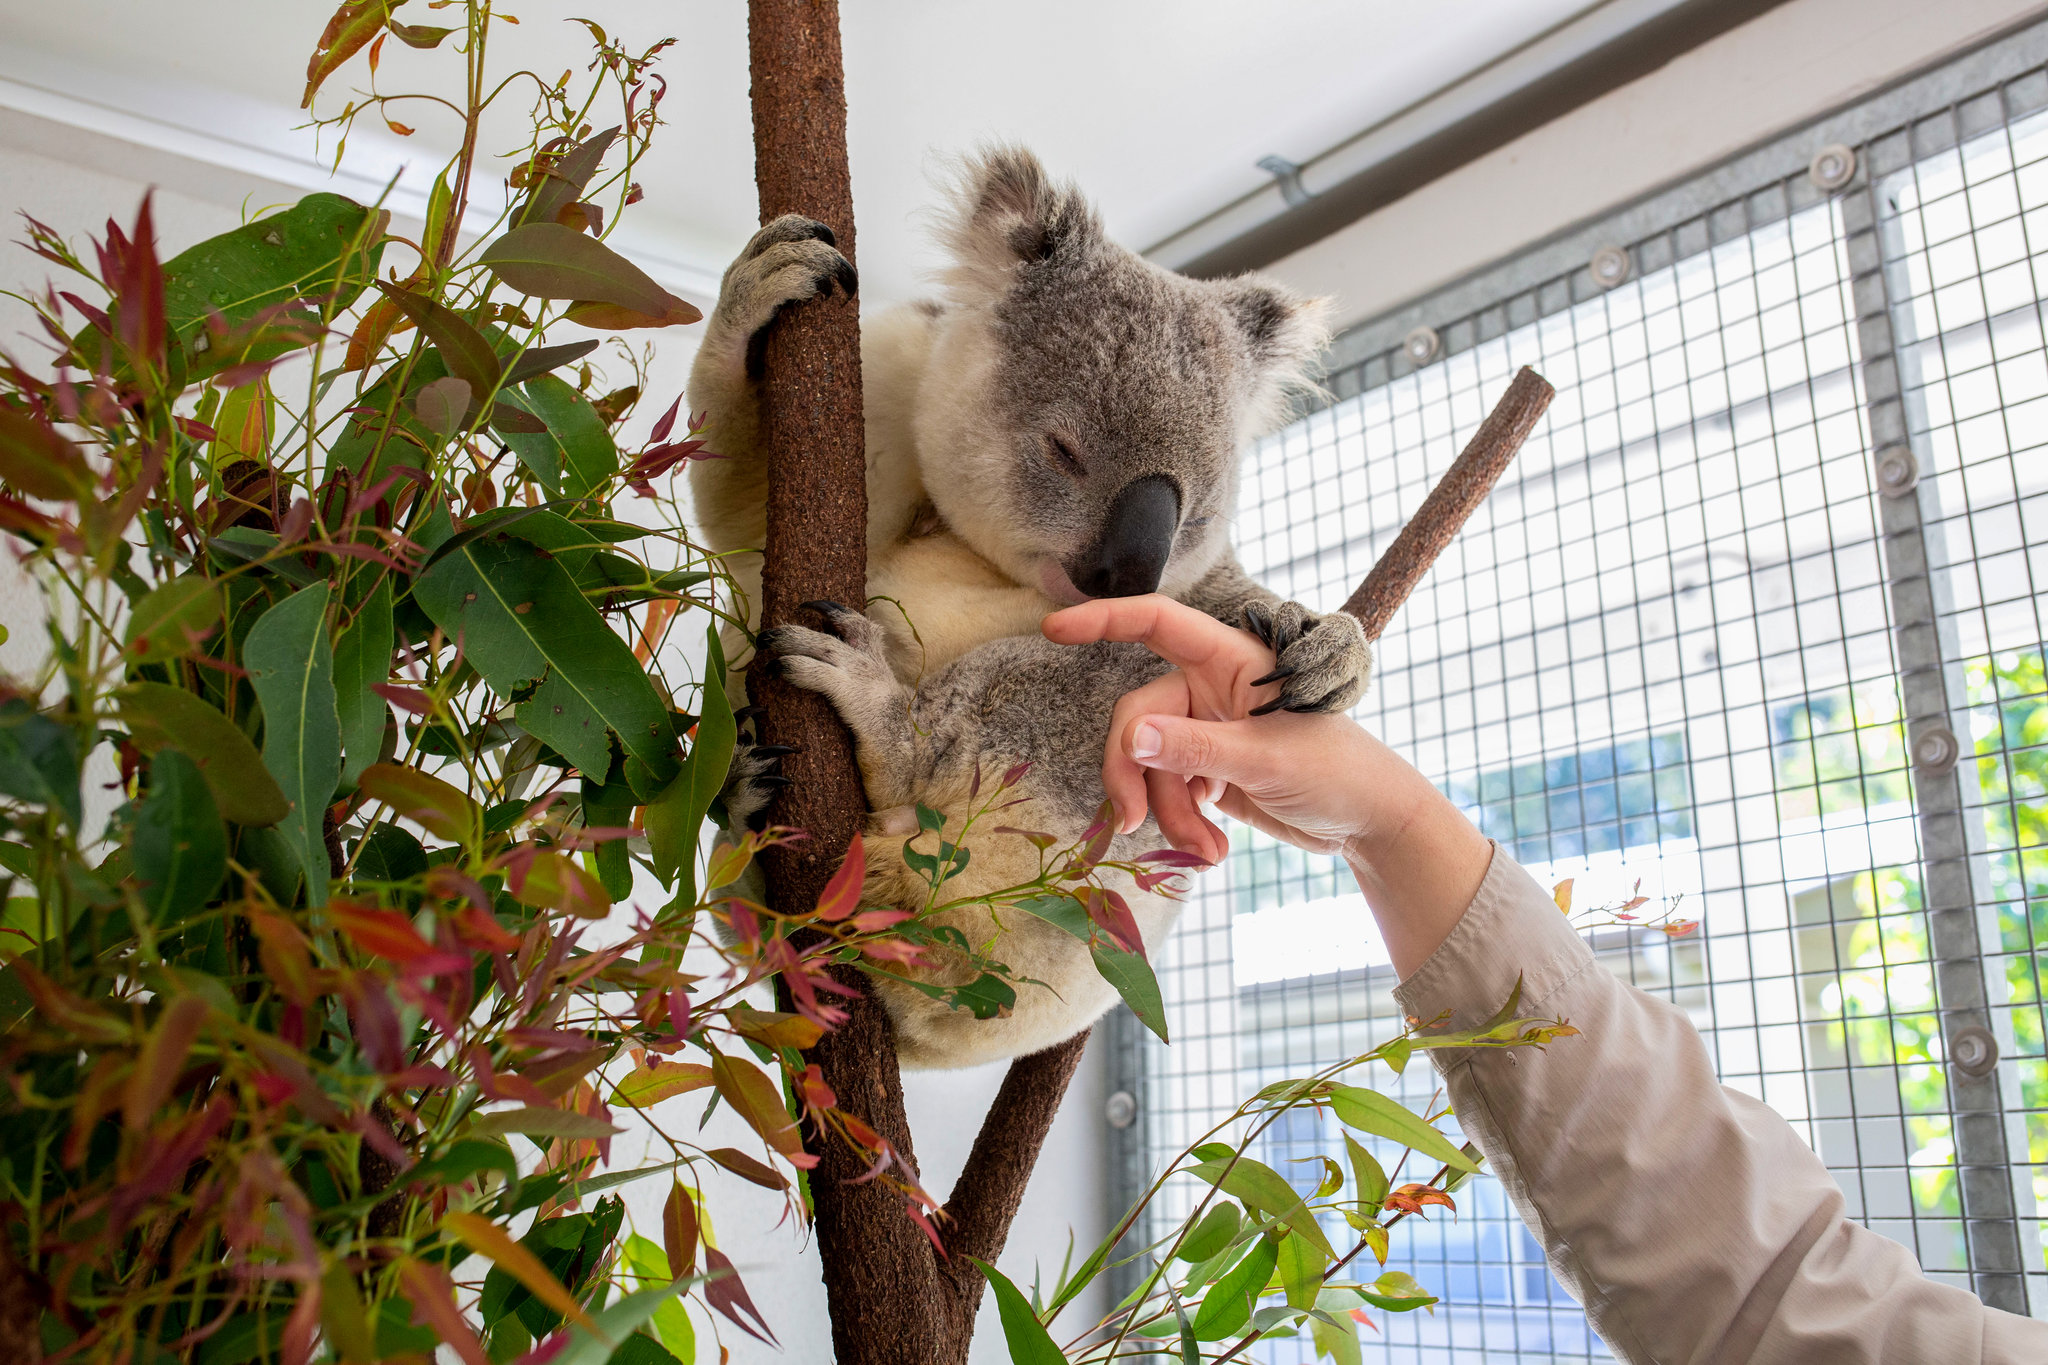 What would a koala say to humans?